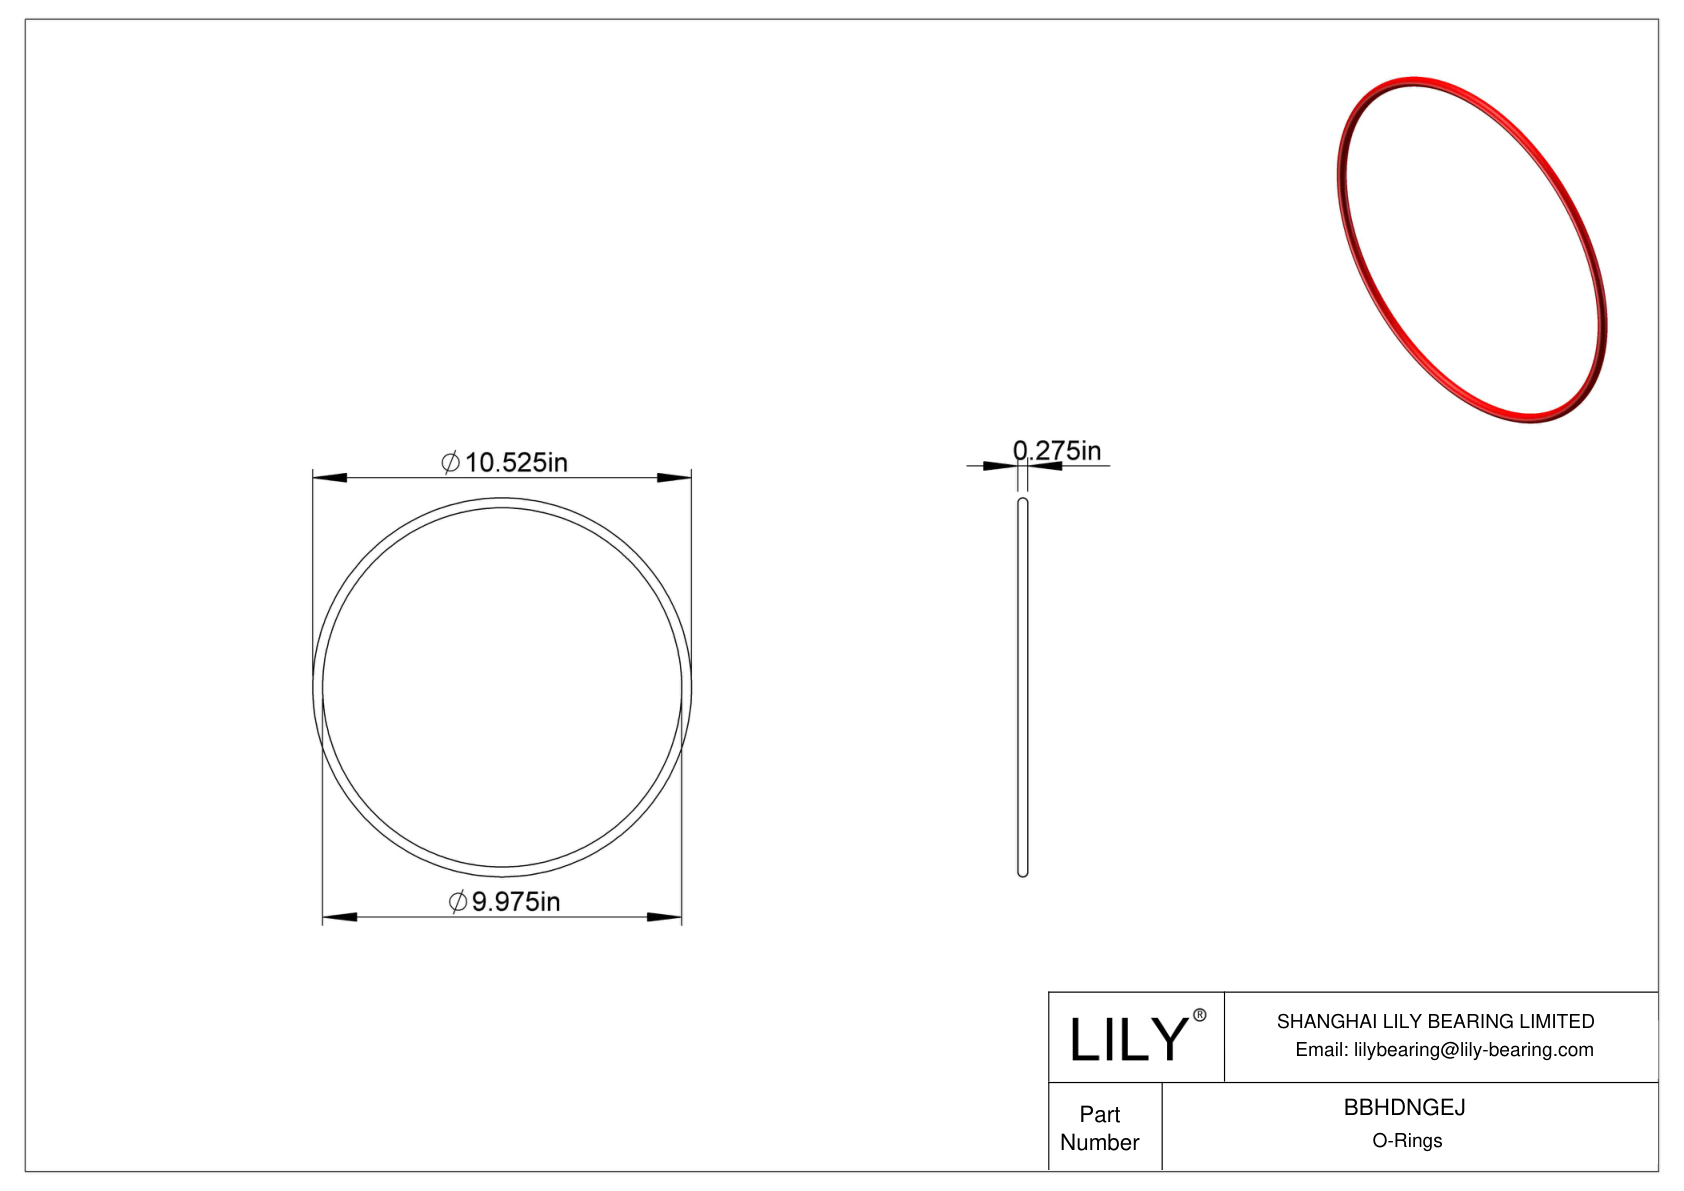 BBHDNGEJ High Temperature O-Rings Round cad drawing